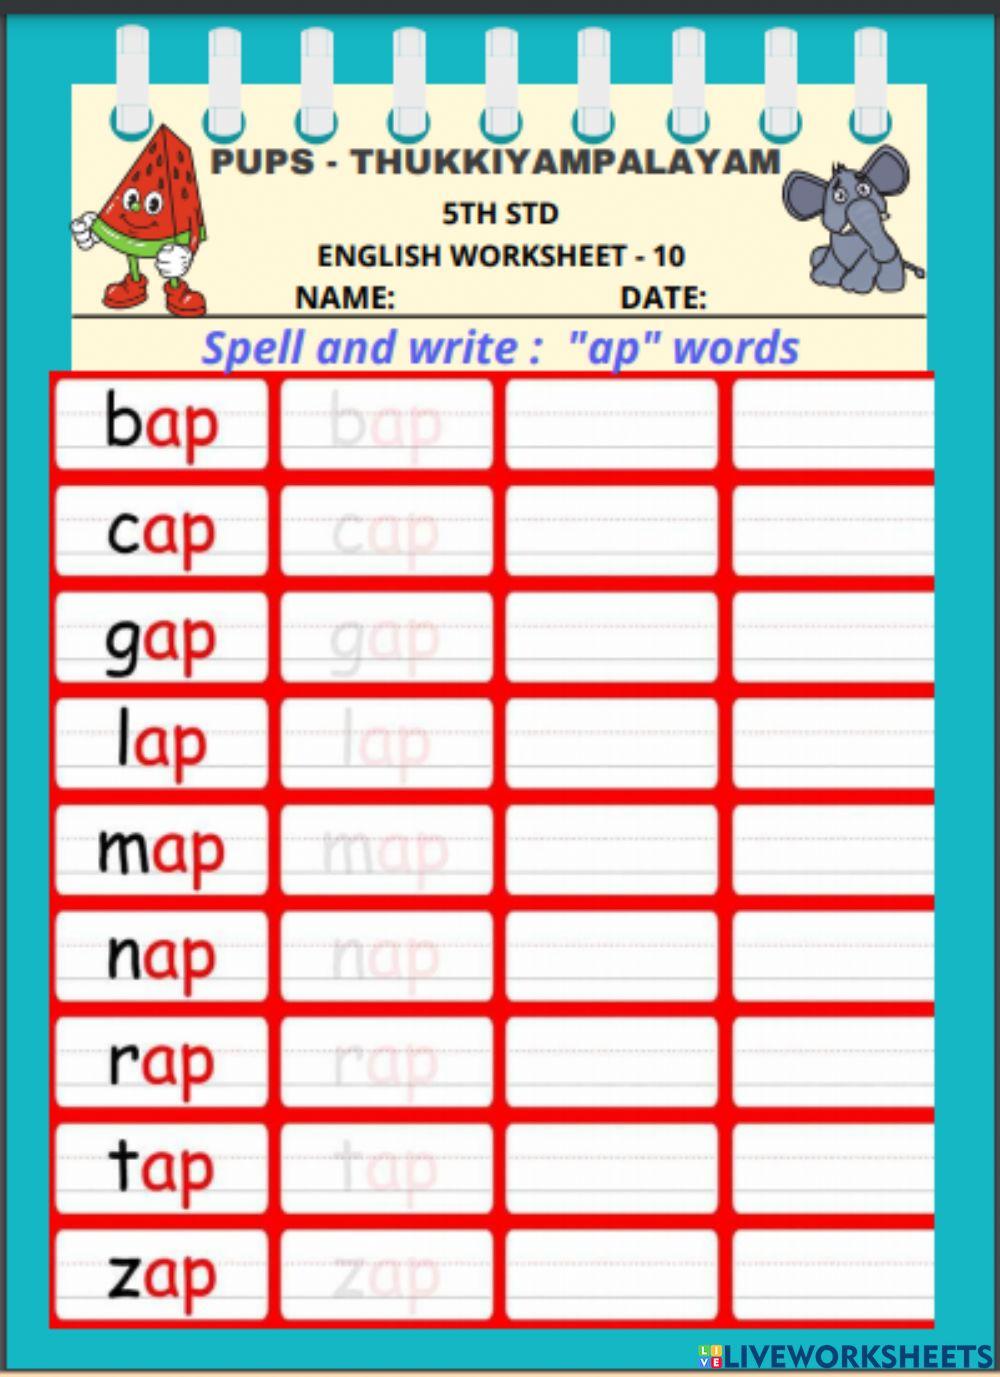 English 3 letter words - ap words